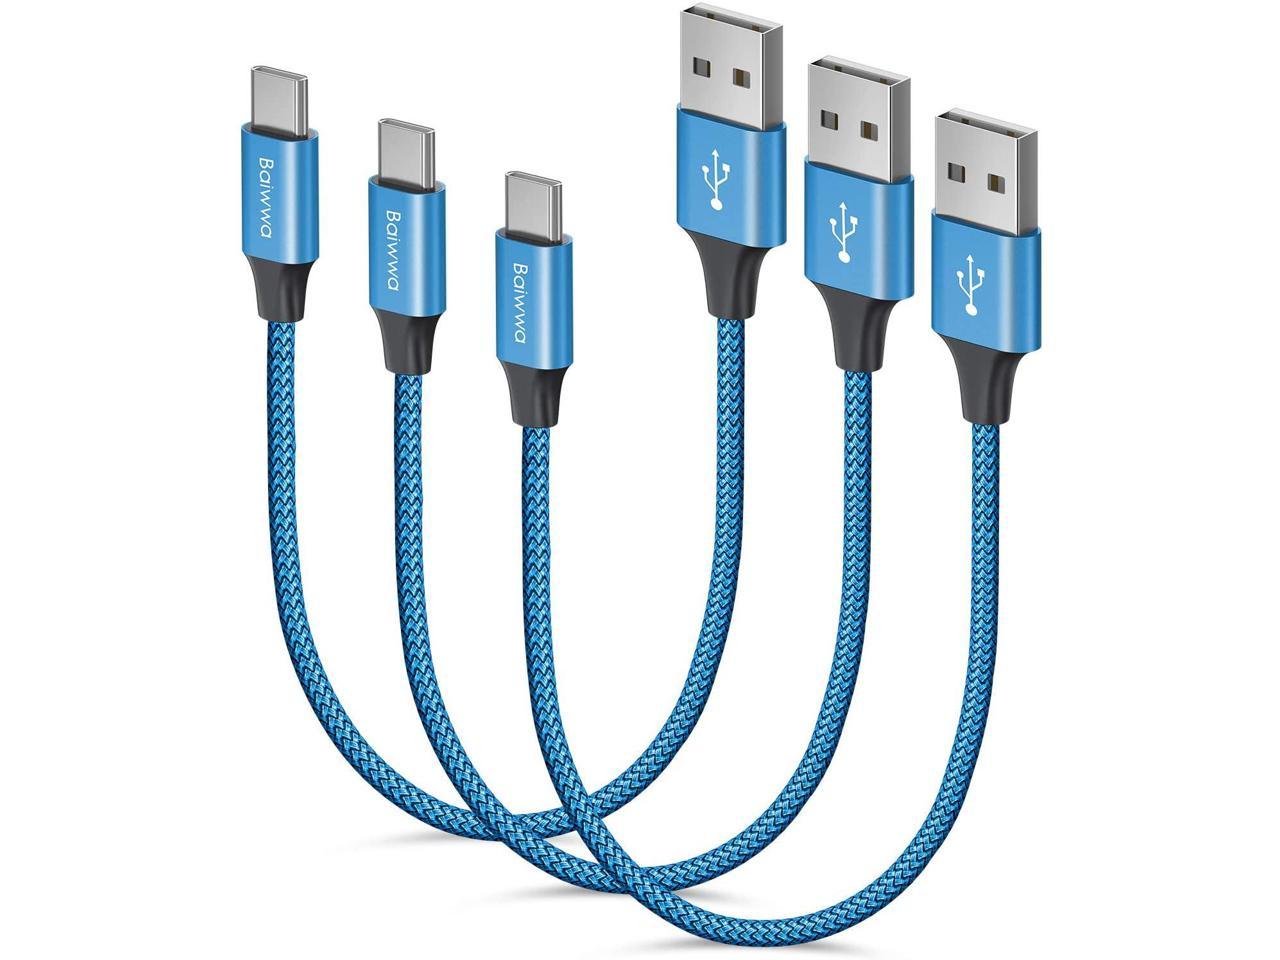 3-Pack 10ft Long USB C Cable LG K51 V60 G8 ThinQ Stylo 6 5 JALIXI 3.1A Fast Charging Cord USB A to USB C Cable Premium Braided Compatible with Samsung Galaxy Note 20 10 9 8 A10e A20e S10 S9 S8 S20 